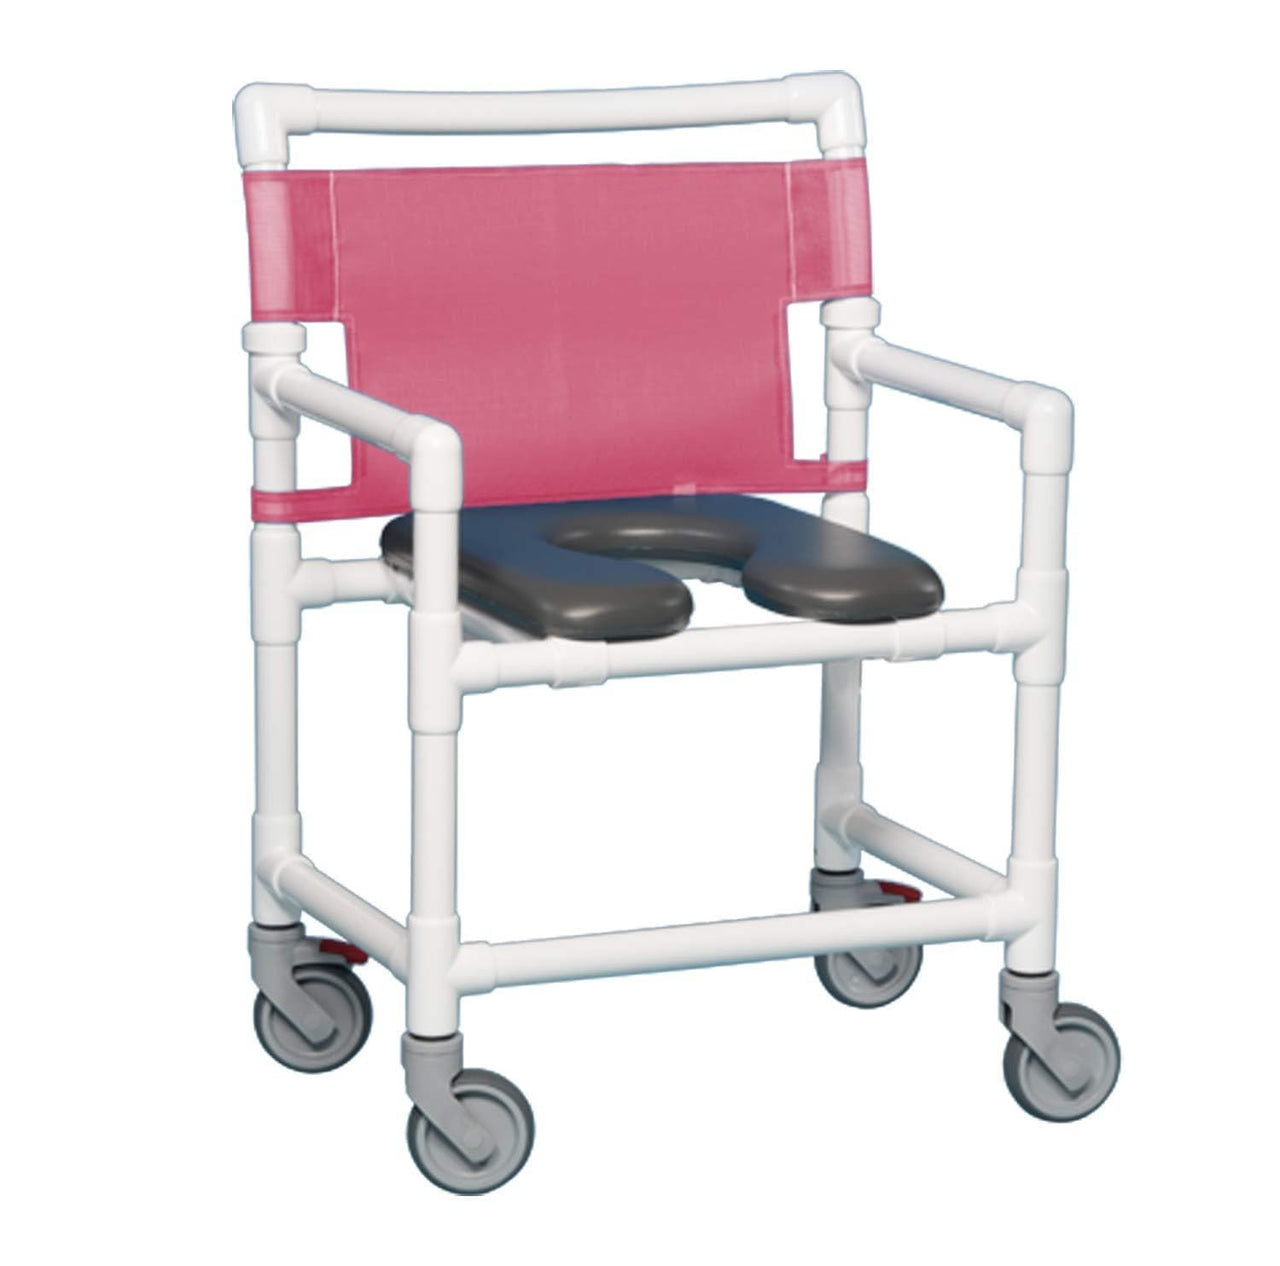 IPU Oversize Bariatric Extra Wide Rolling PVC Shower Chair Commode - Senior.com PVC Shower Chairs